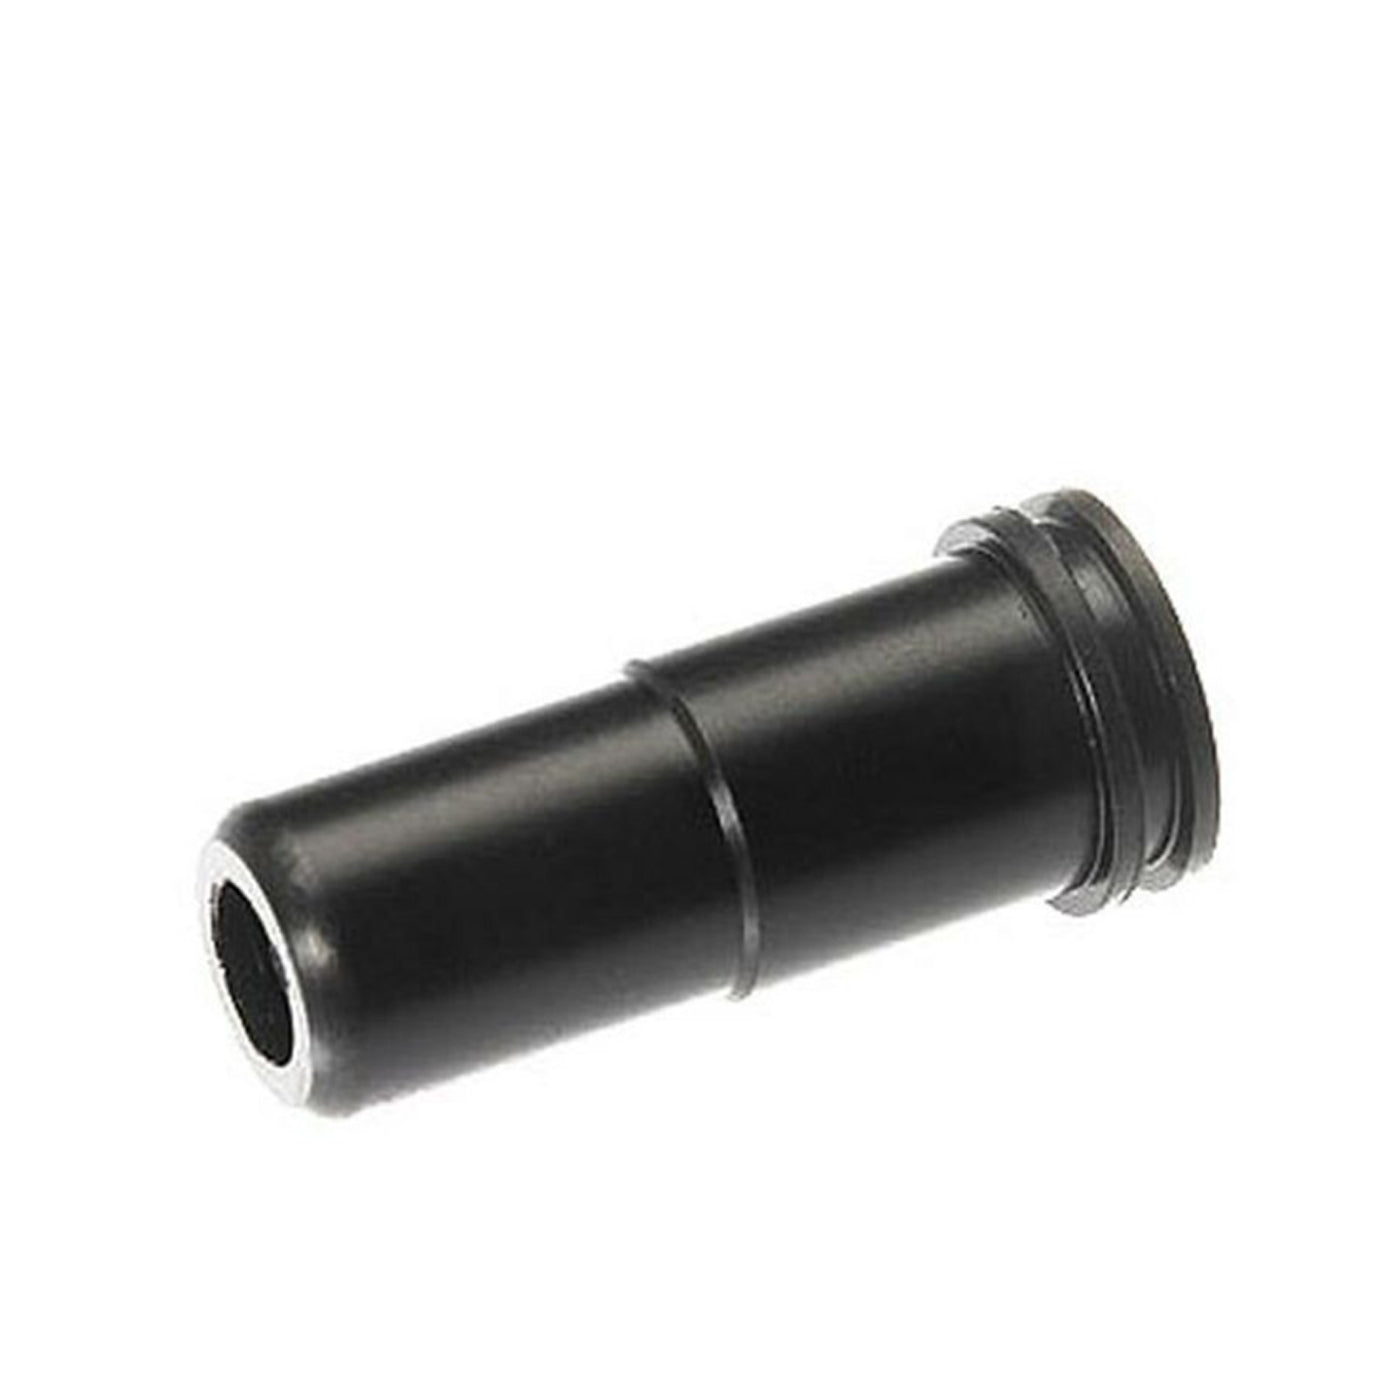 SRC PLASTIC AIR NOZZLE FOR AIRSOFT V2 GEARBOX